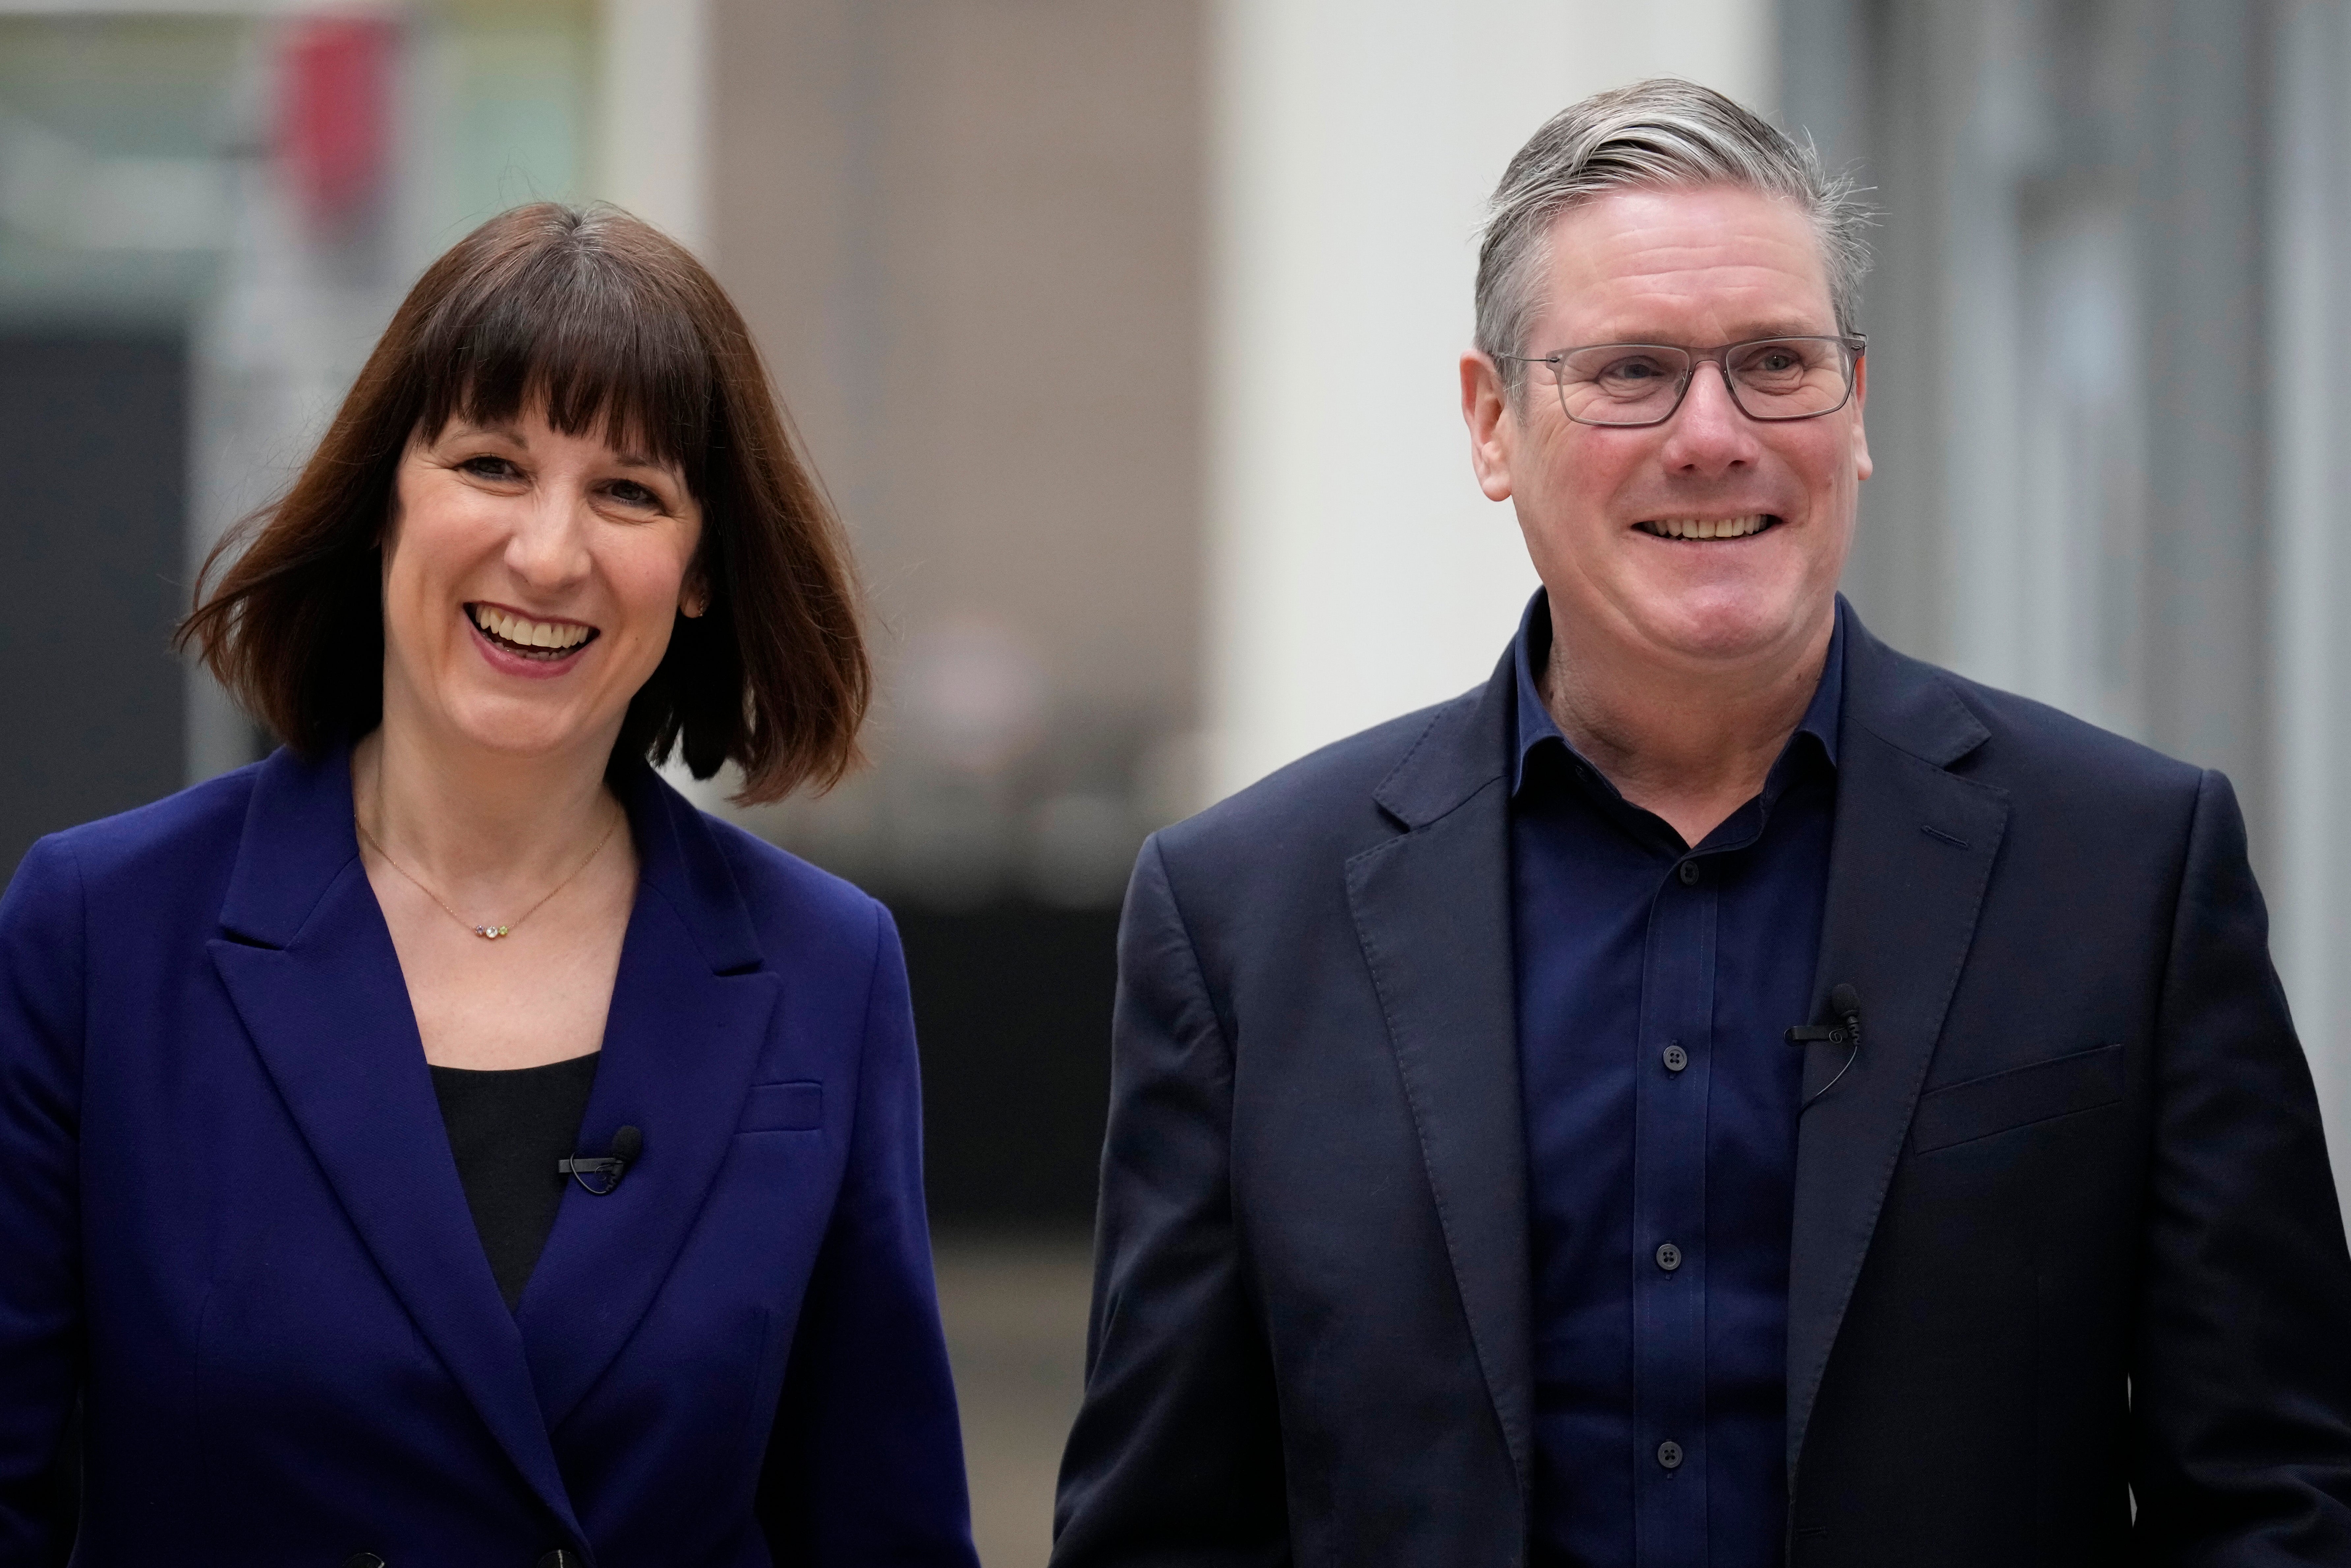 Rachel Reeves and Keir Starmer have scaled back their original green spending plans